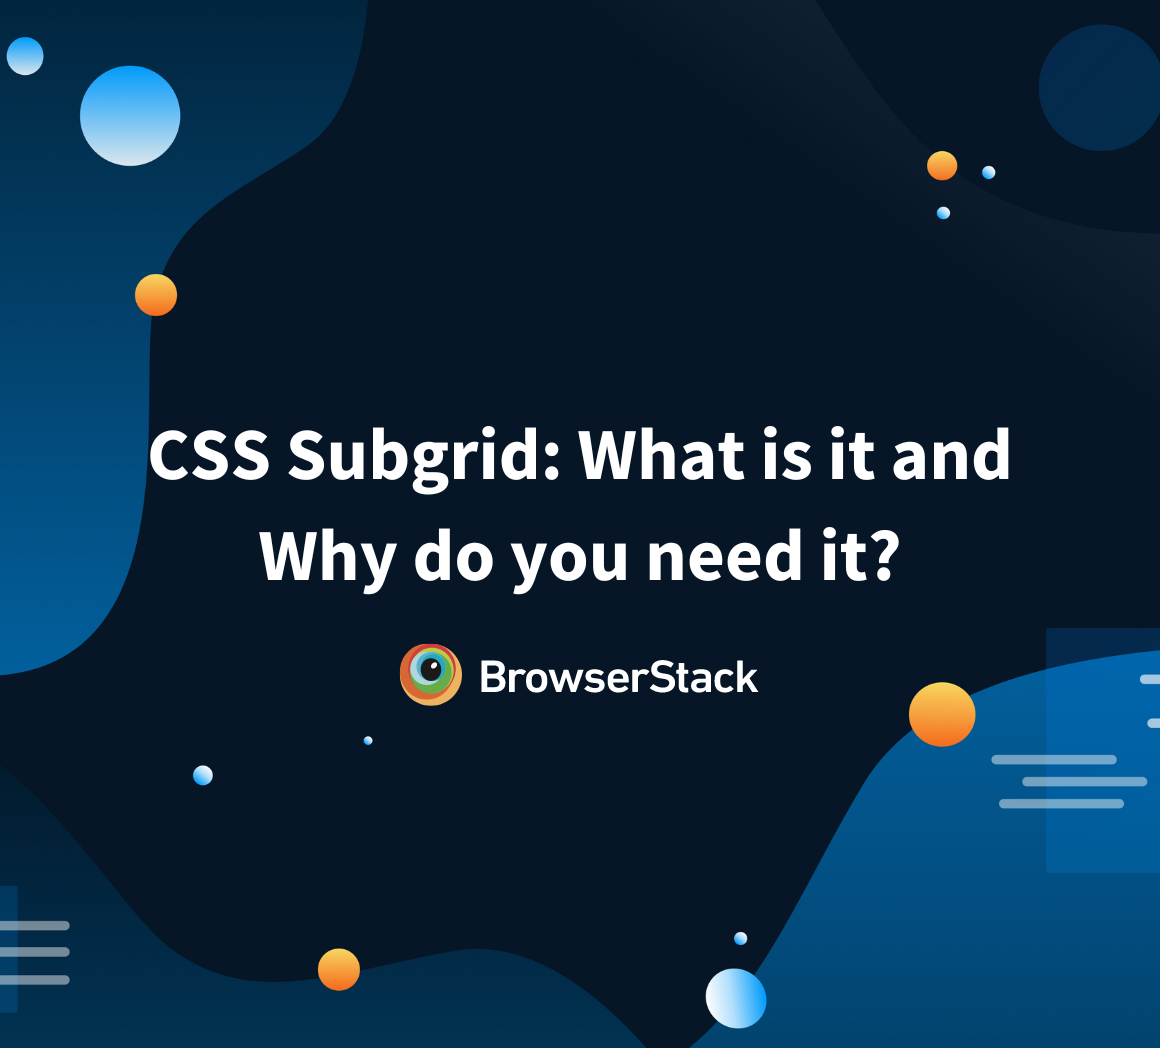 CSS Subgrid: What is it and Why do you need it?